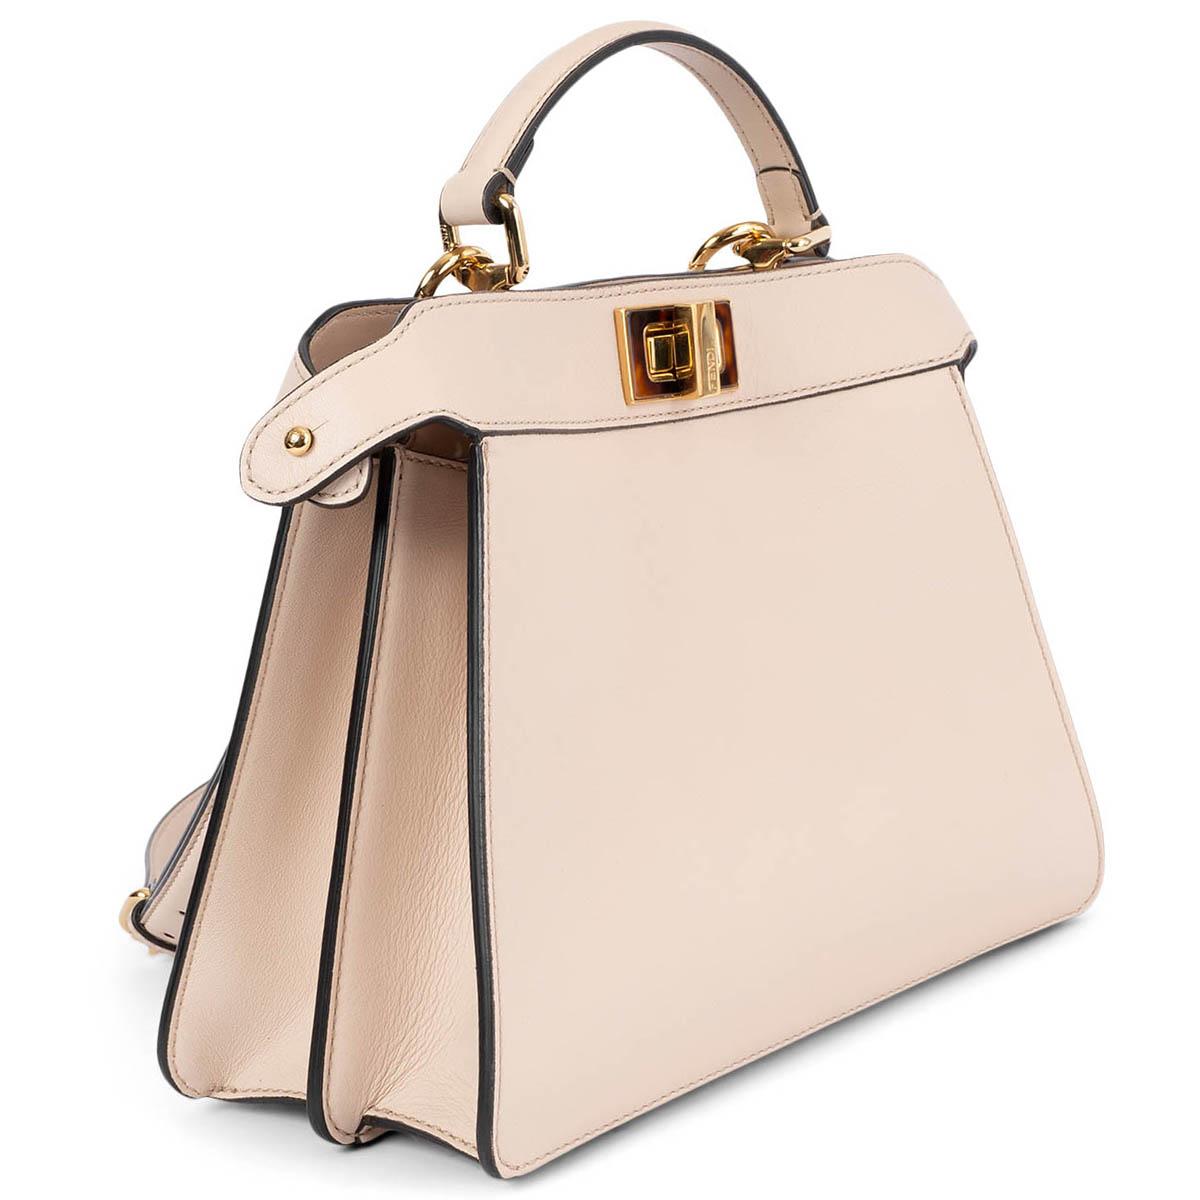 100% authentic Fendi Peekaboo ISeeU small bag made of nude leather and embellished with the classic twist lock on both sides. Featuring soft nappa leather lining, two compartments separated by a stiff partition, inner flat pocket, bar and fastening